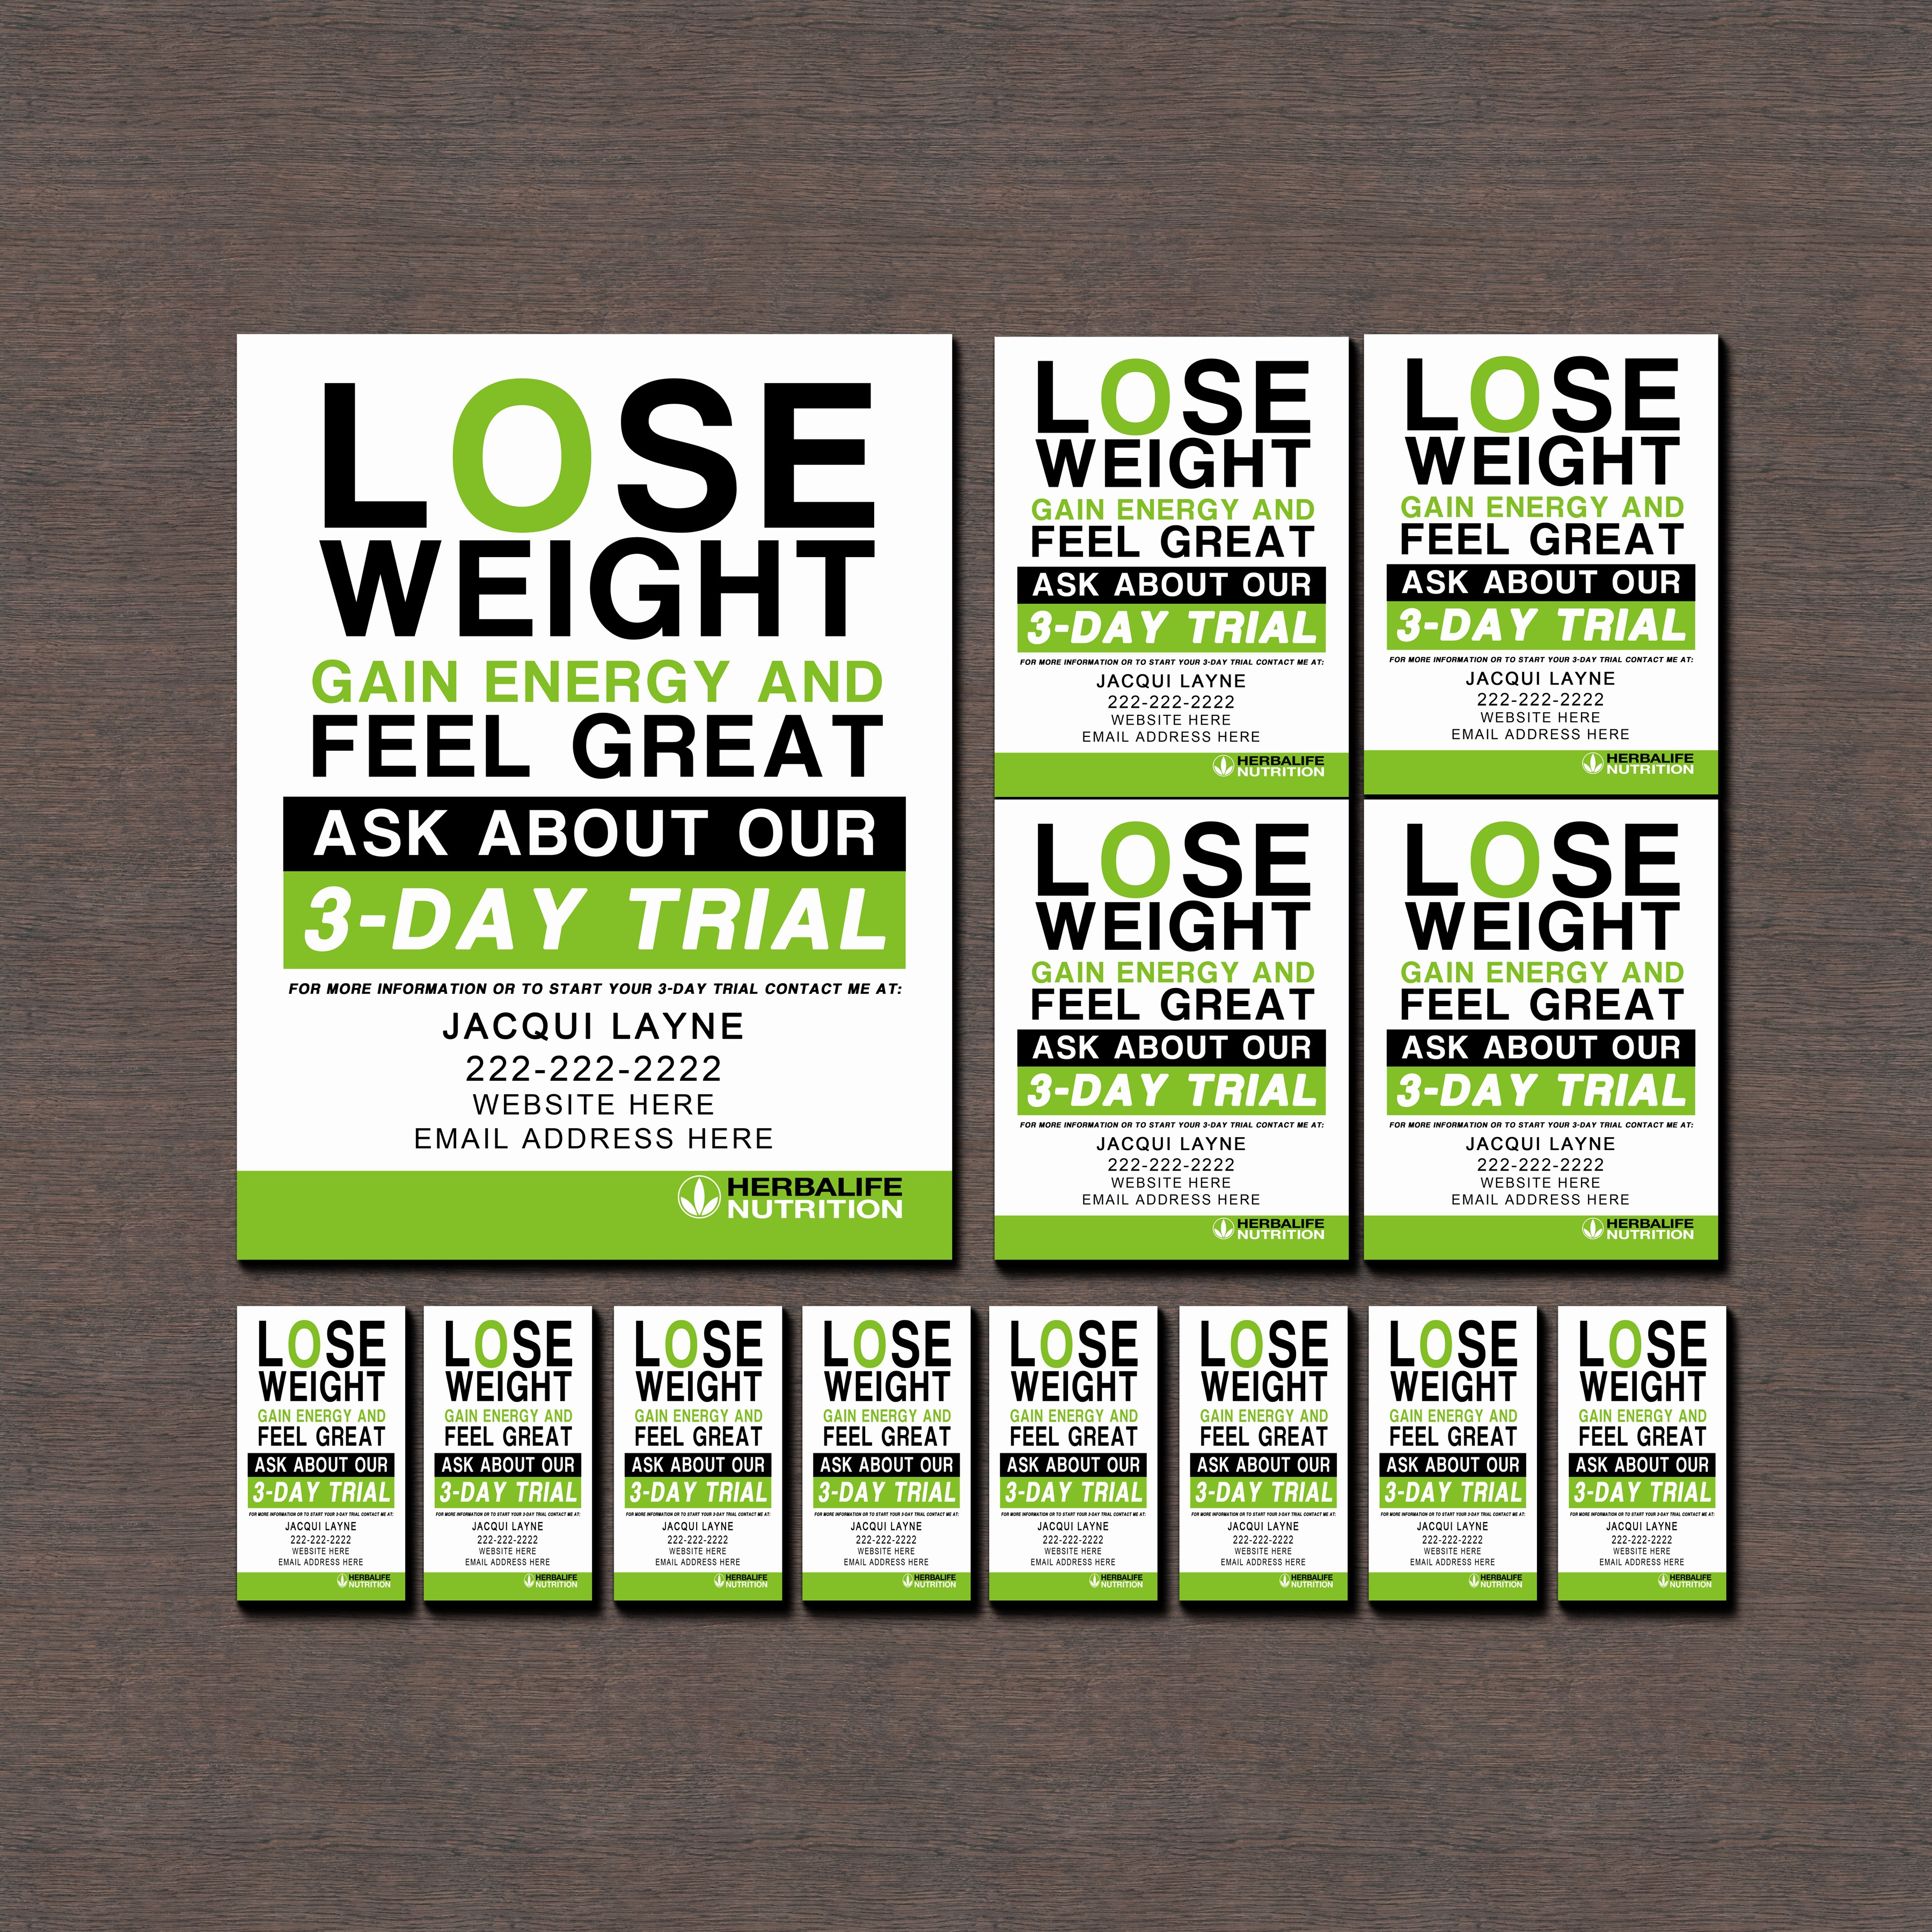 herbalife flyers inspirational new listings herbalife business cards and flyers of herbalife flyers